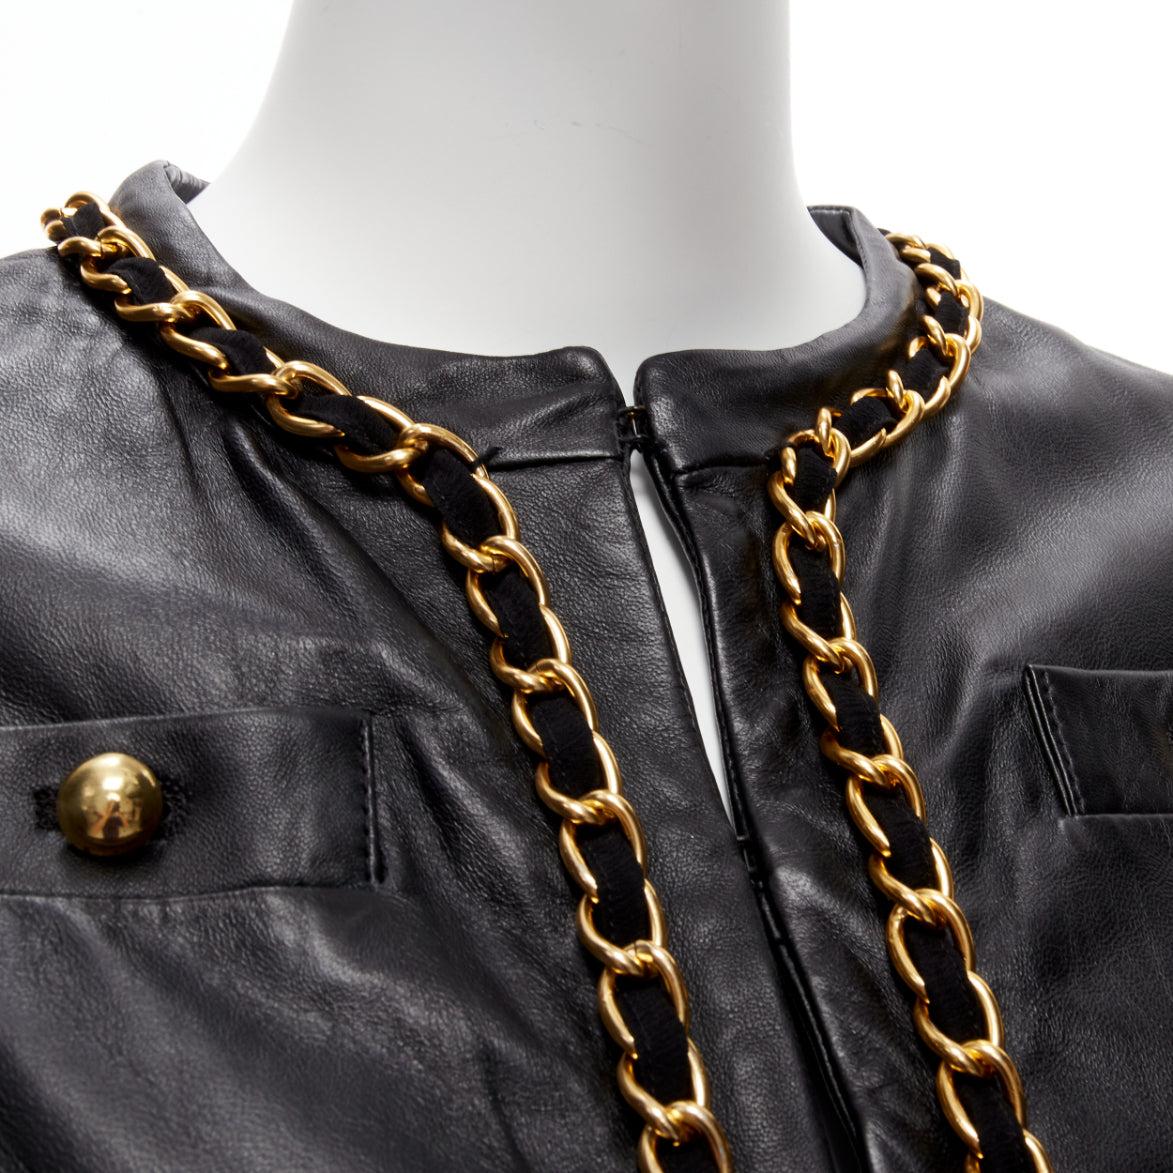 rare MOSCHINO Cheap Chic gold chain black quilted leather cropped jacket IT38 XS
Référence : TGAS/D00523
Marque : Moschino
Collectional : Bon marché et chic
MATERIAL : Cuir, métal
Couleur : noir, or
Motif : Solide
Fermeture : crochet et